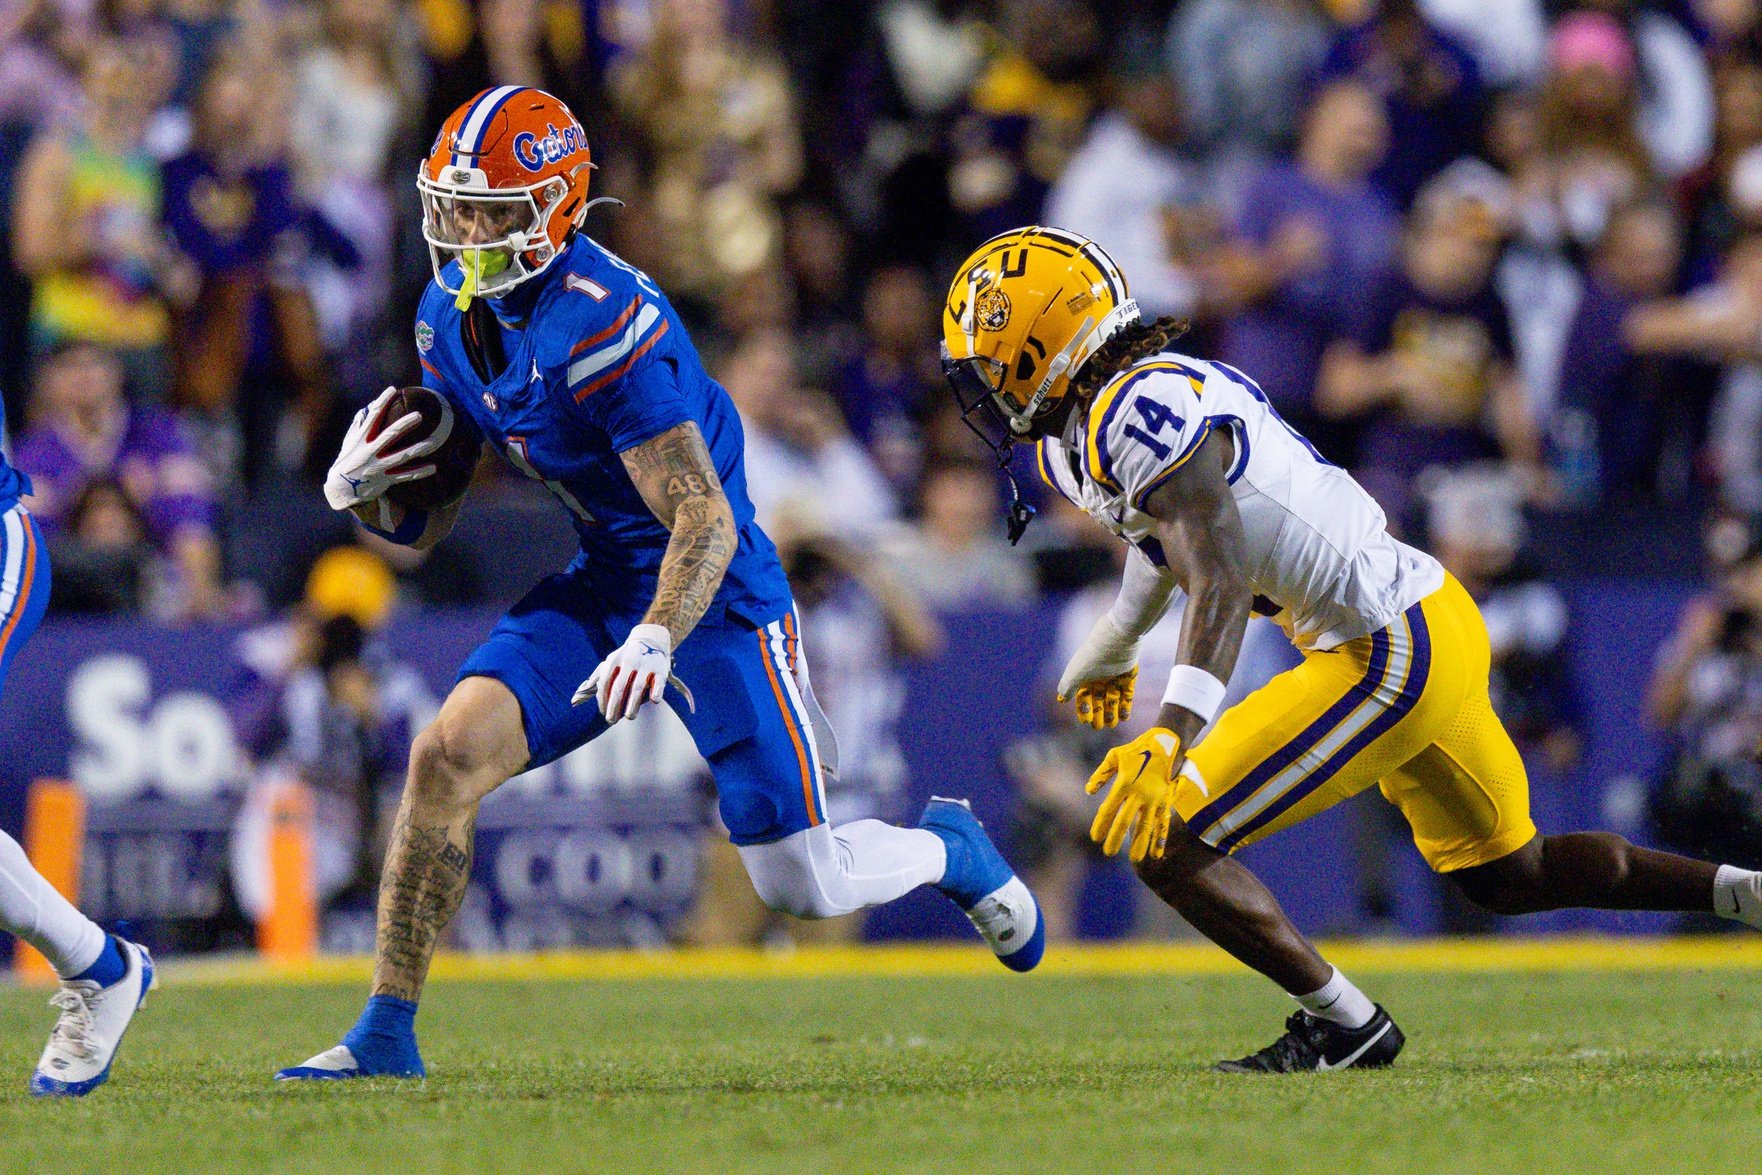 Florida Gators wide receiver Ricky Pearsall (1) catches a pass against LSU Tigers safety Andre' Sam (14) during the first half at Tiger Stadium.